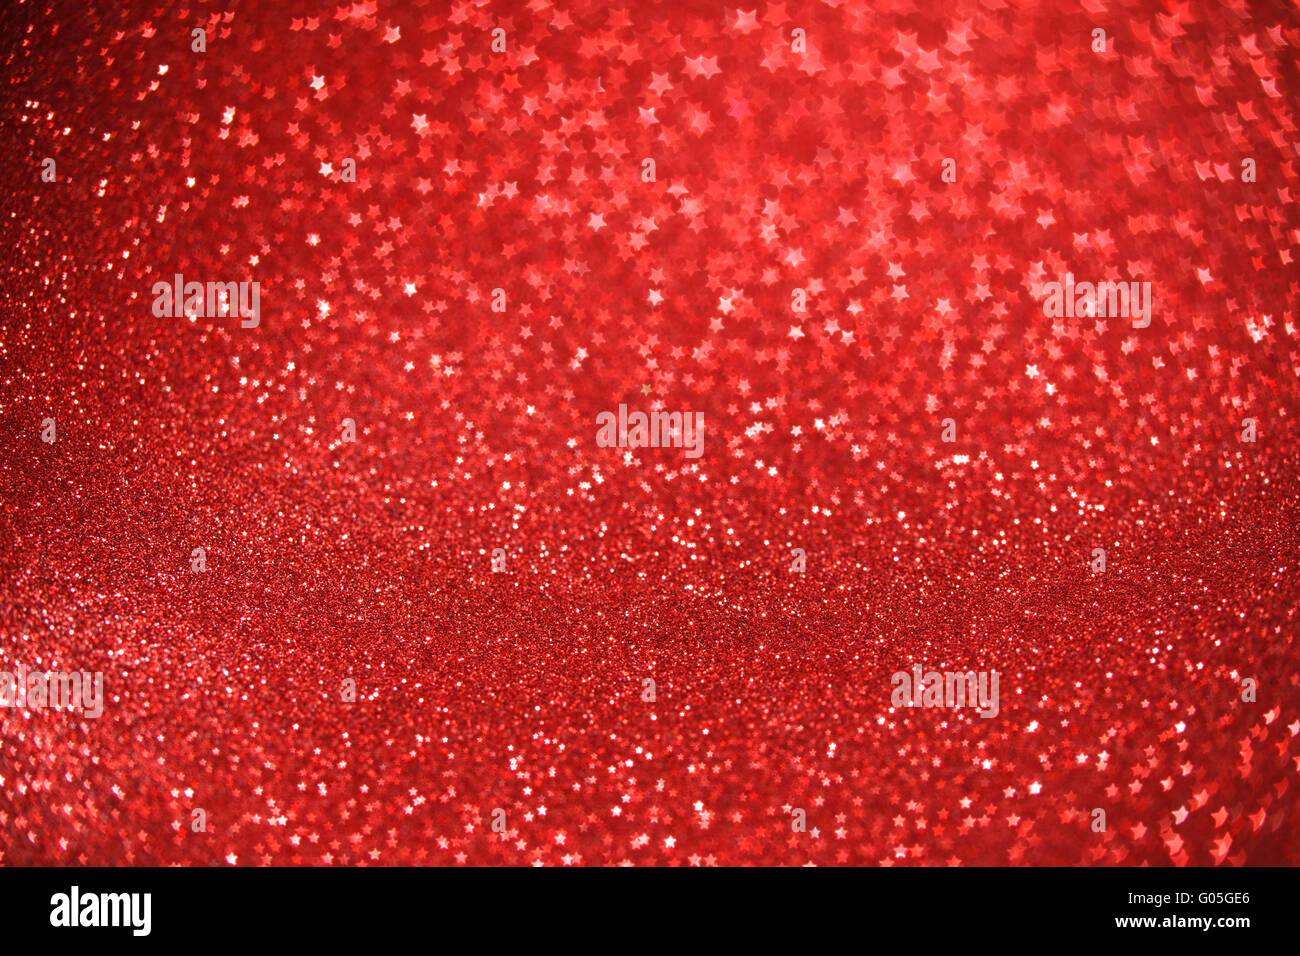 Beautiful festive abstract background with a lot of fivepointed stars Stock Photo